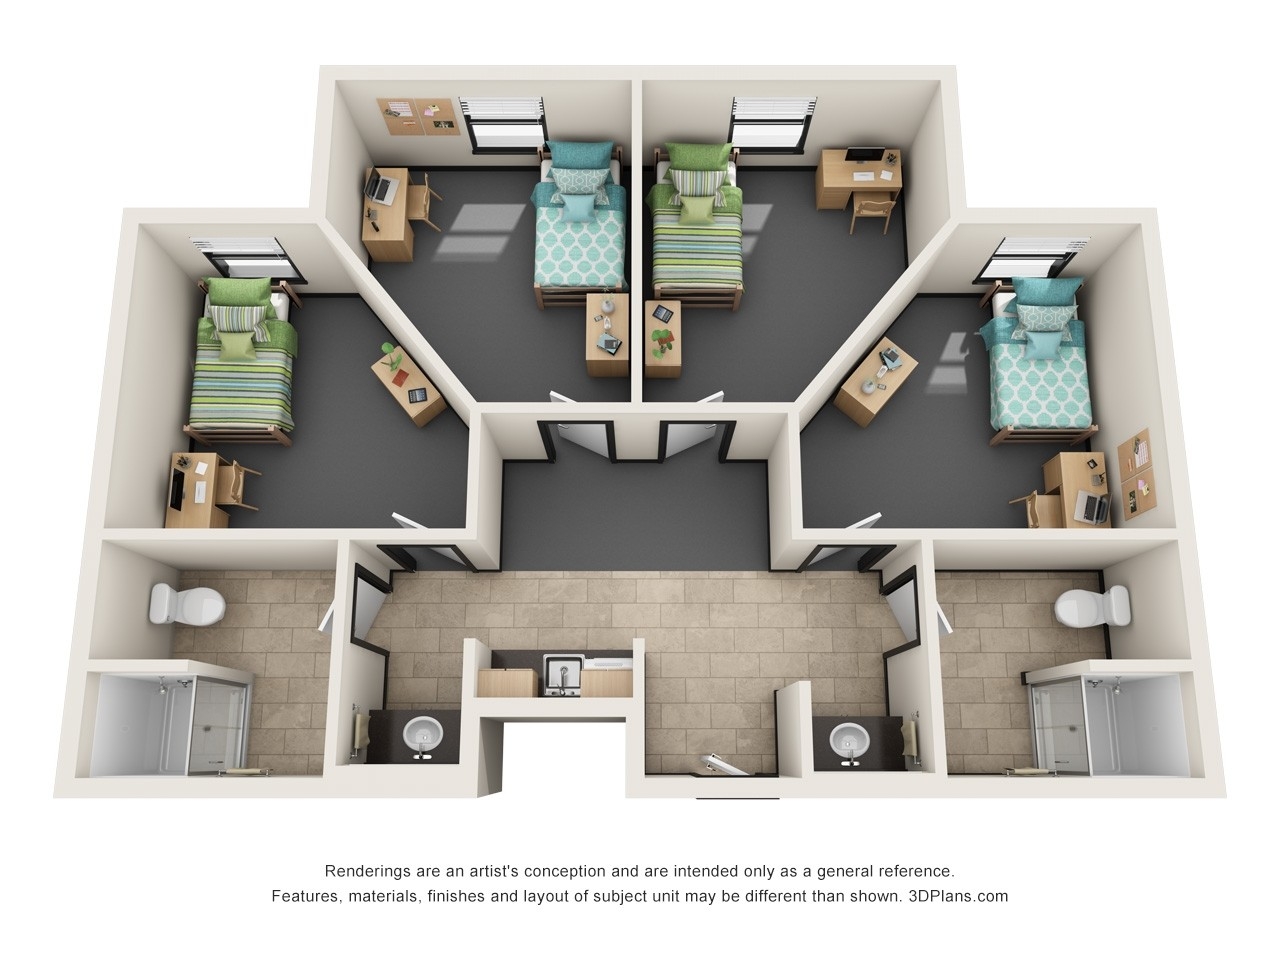 Rendering of University Suites 4-Bedroom Suite. This rendering is an artist's conception and are intended only as a general reference. Features, materials, finishes and layout of subject unit may be different than shown. 